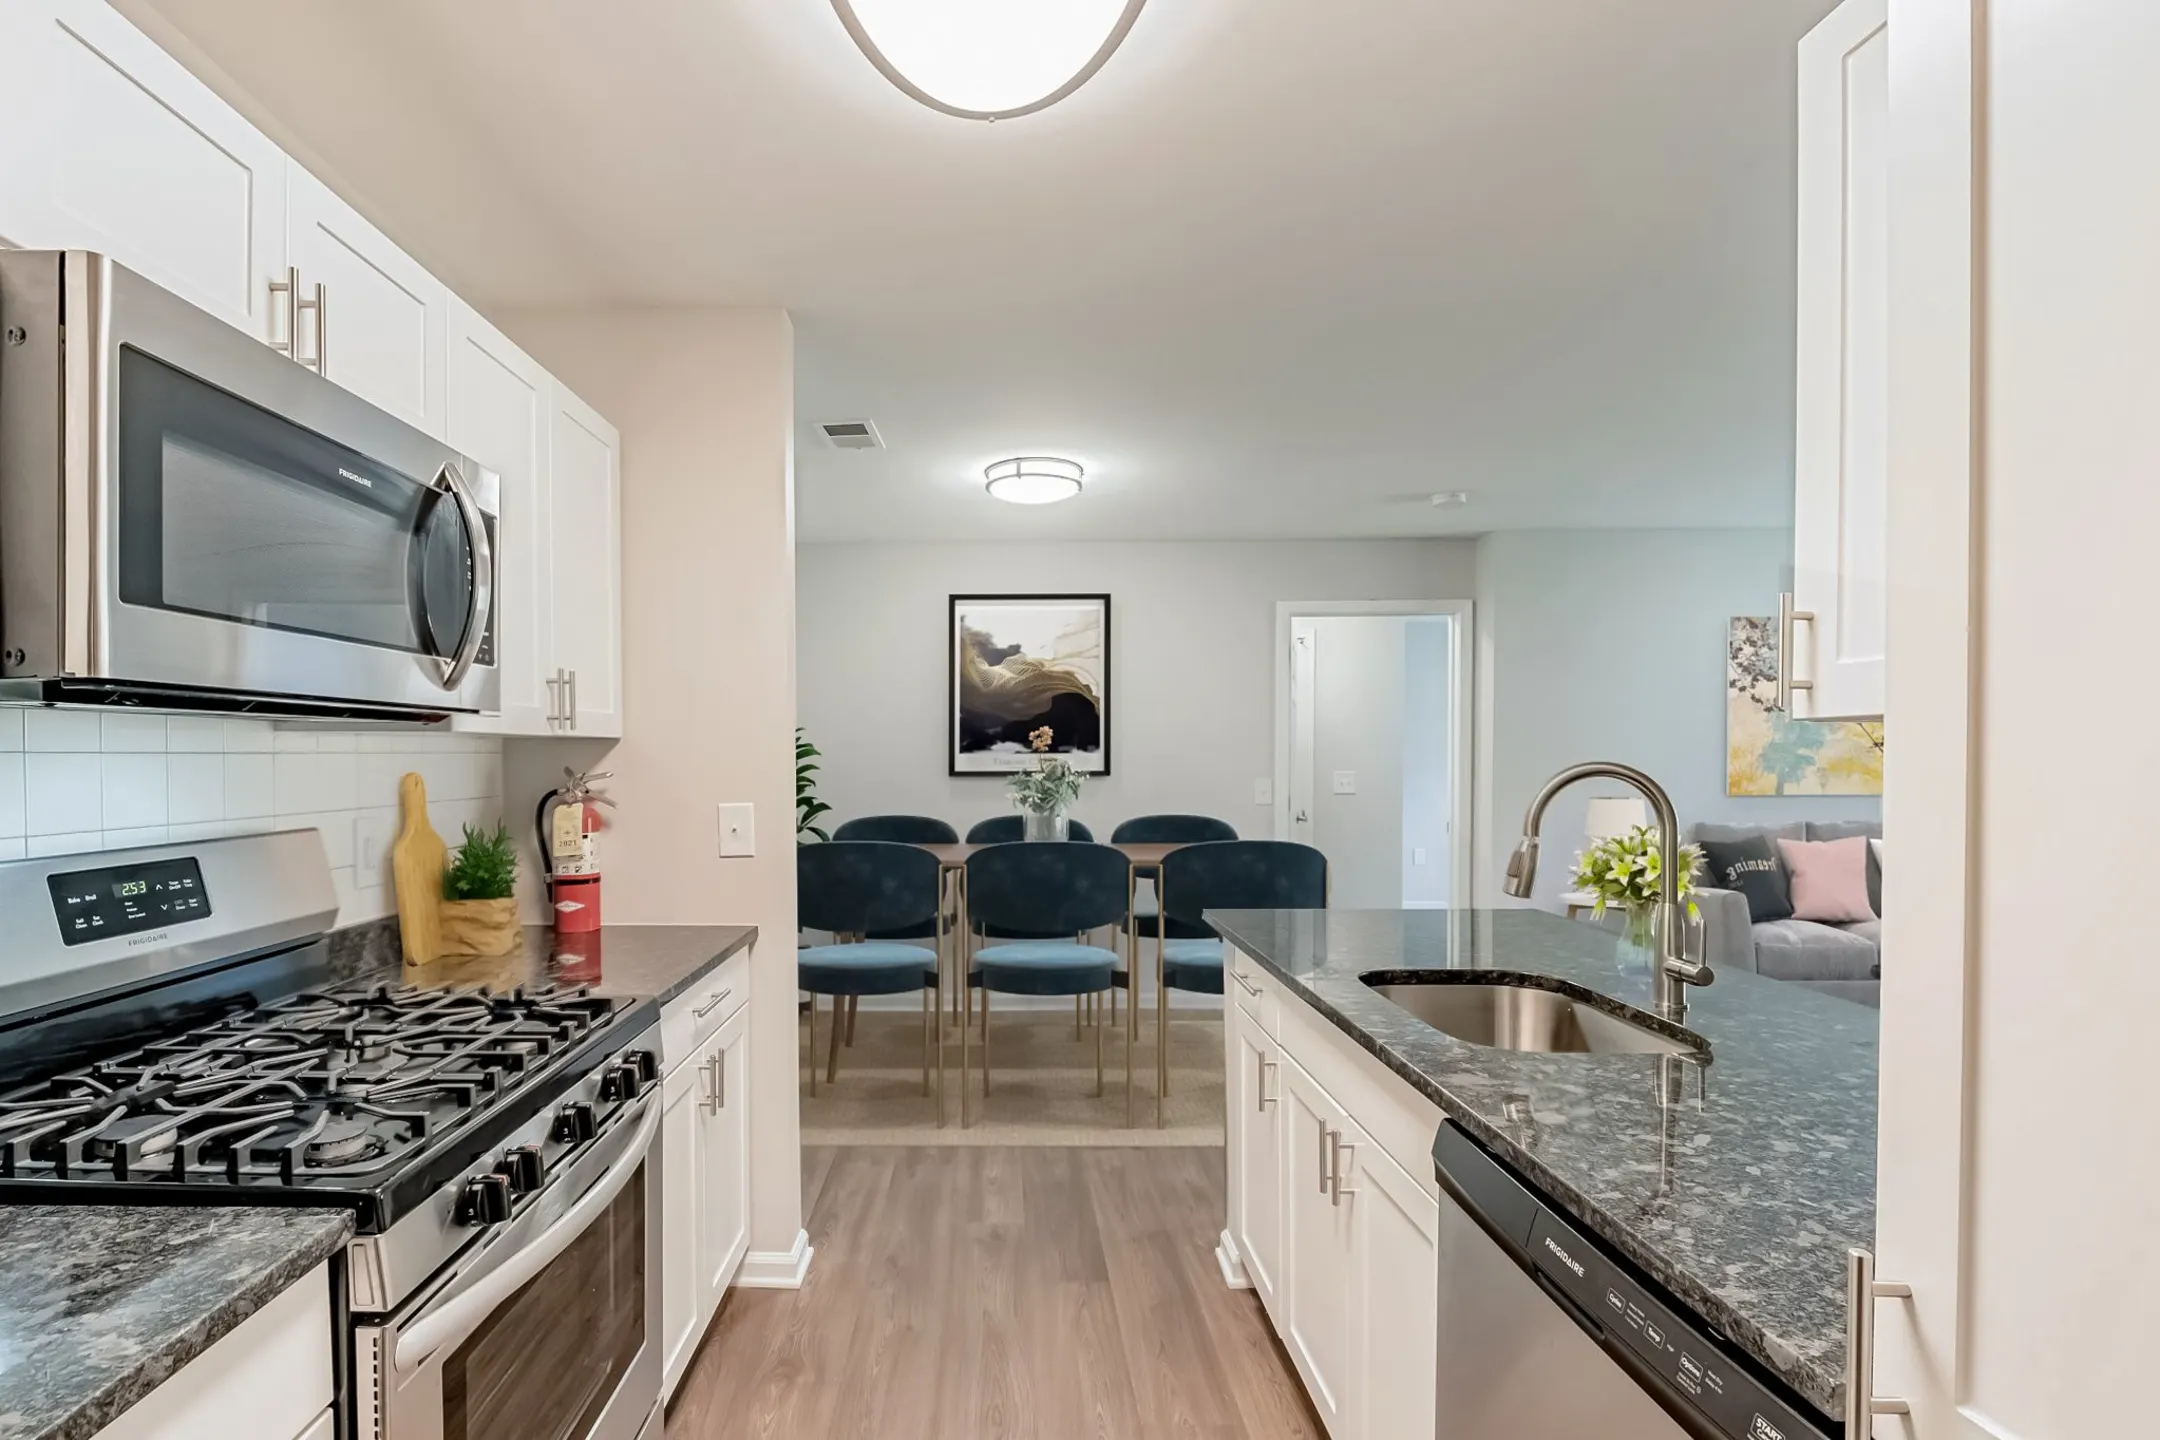 Kitchen - Eagle Rock Apartments at Freehold - Freehold, NJ